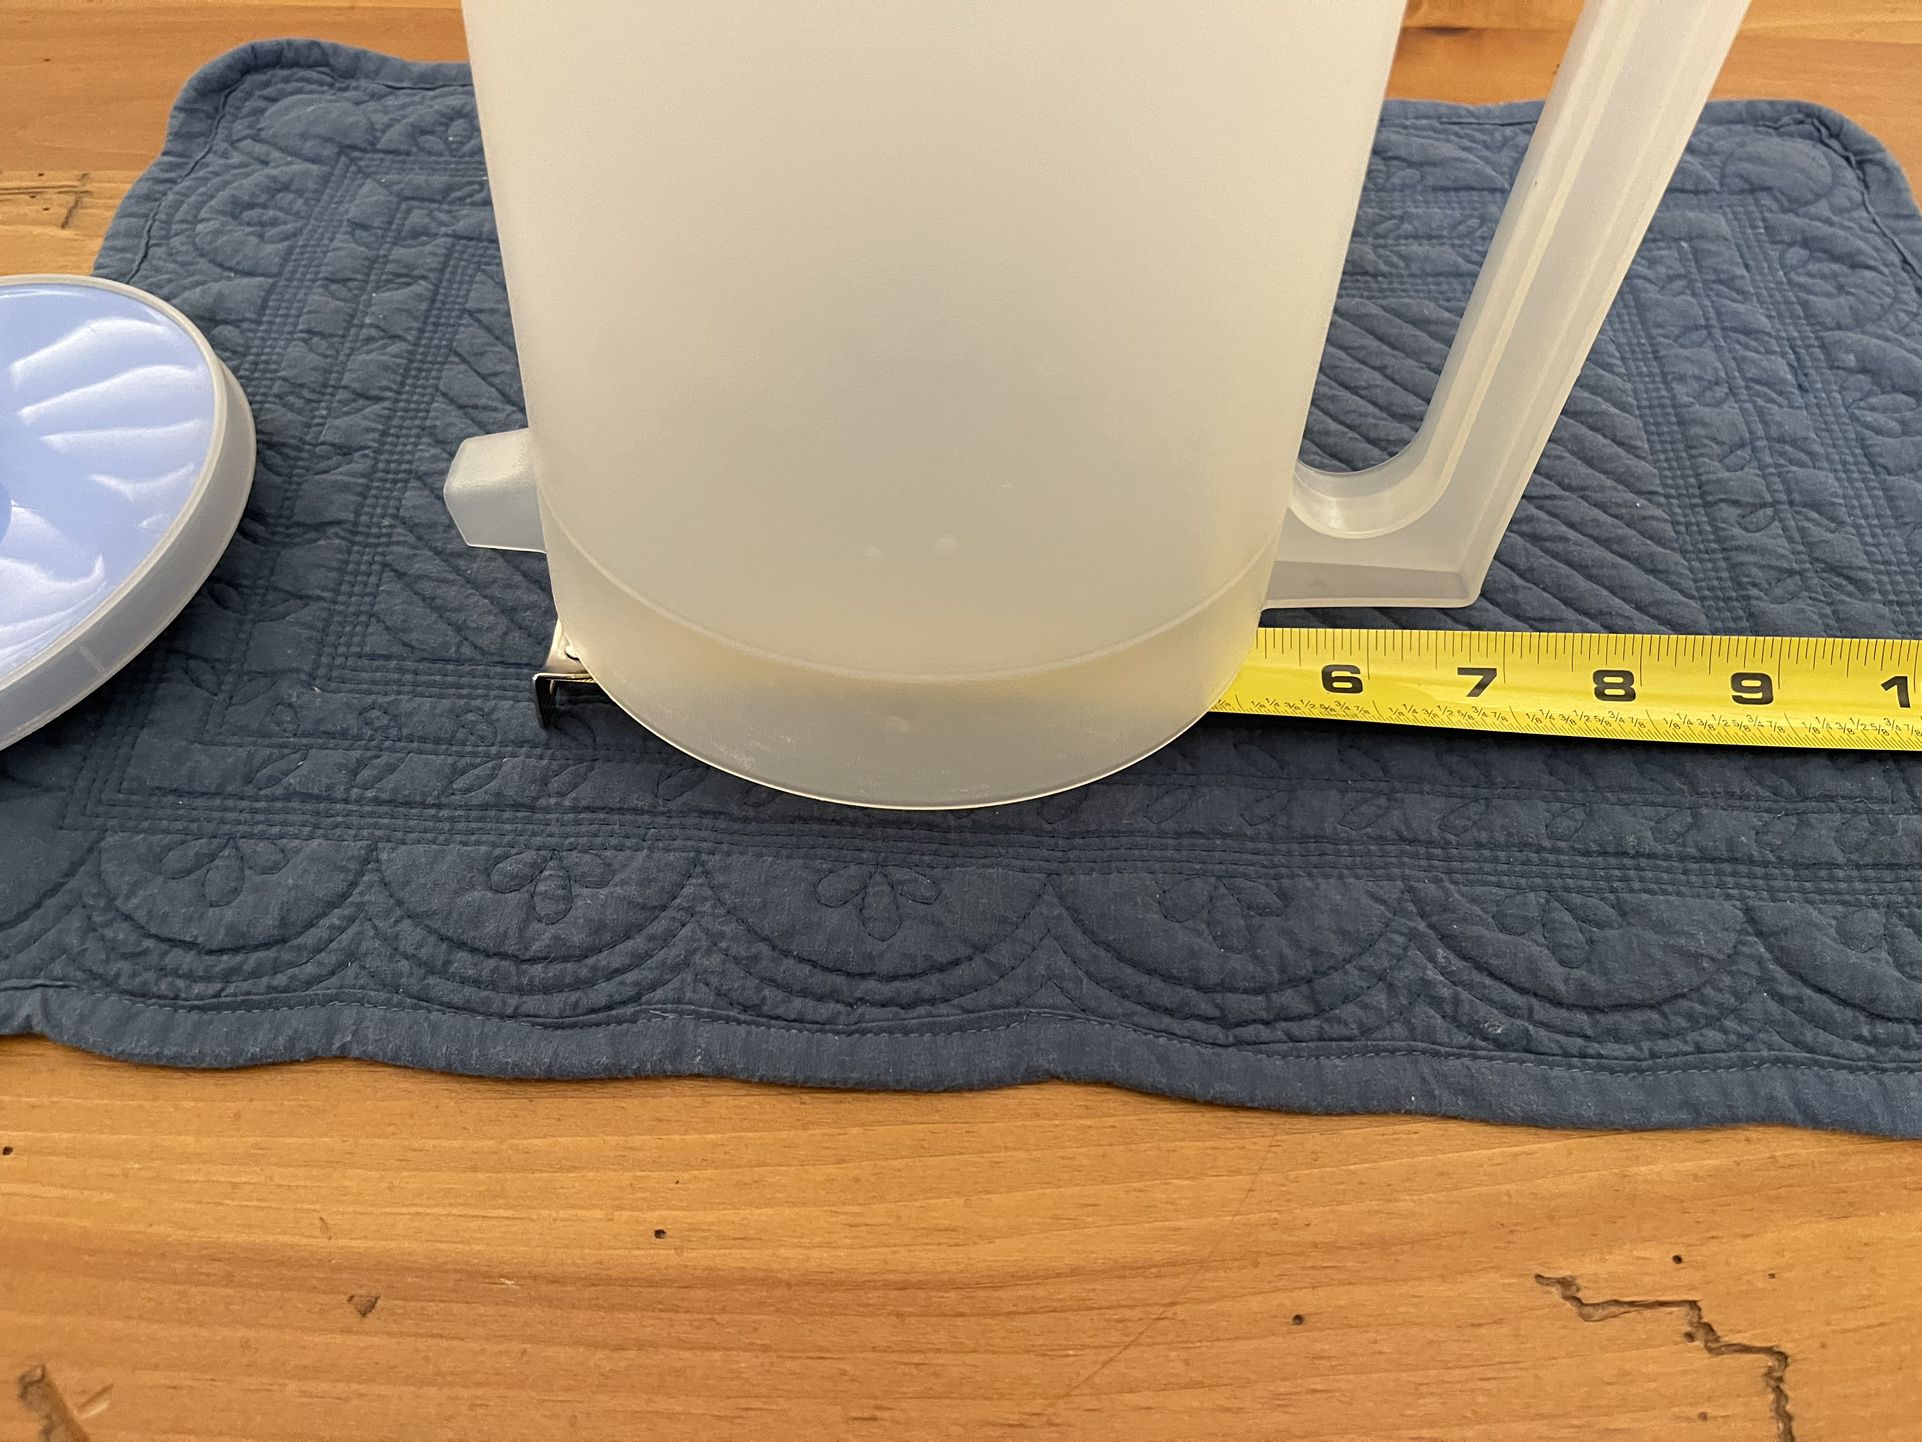 Vintage Tupperware Frosted 2 Quart Pitcher/Tupperware for Sale in